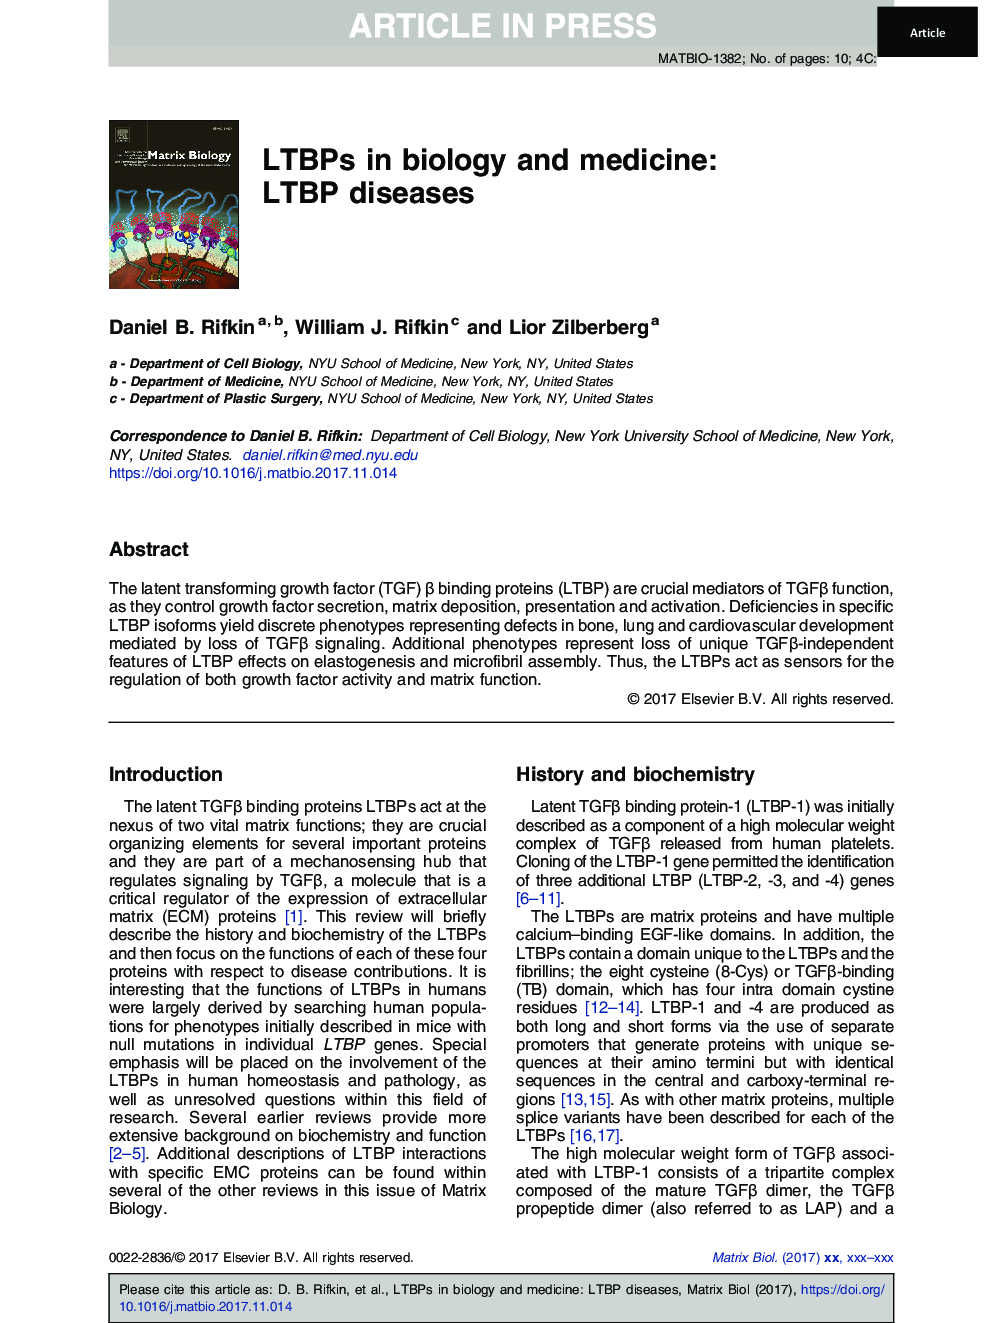 LTBPs in biology and medicine: LTBP diseases